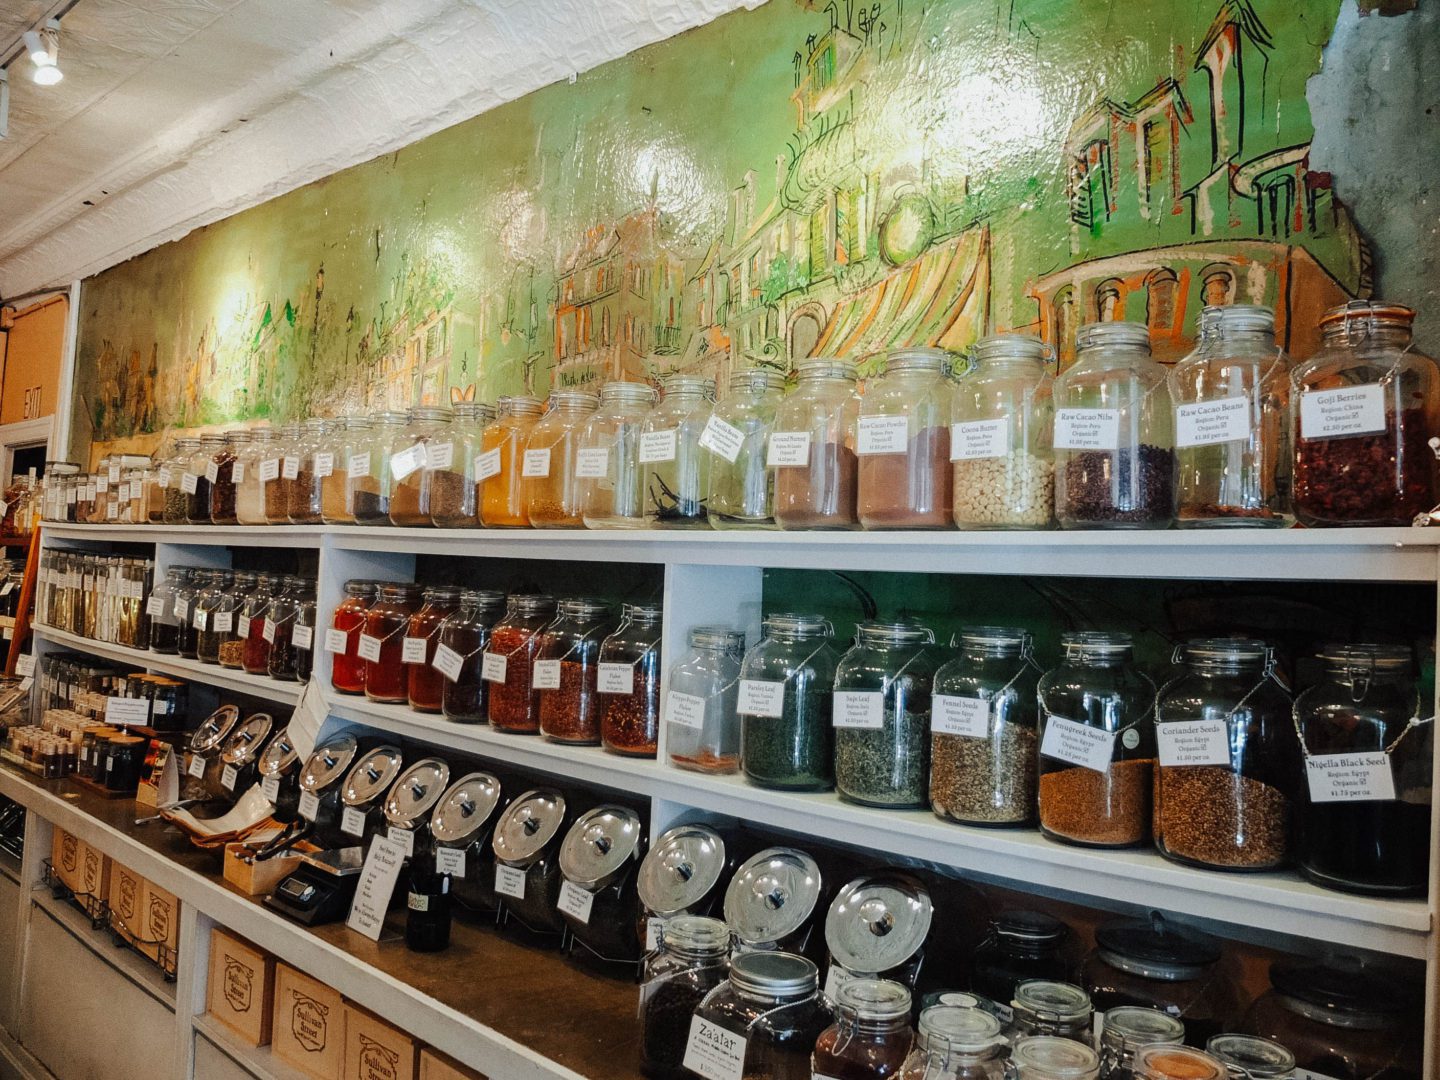 lots of spices in jars lined up along a wall